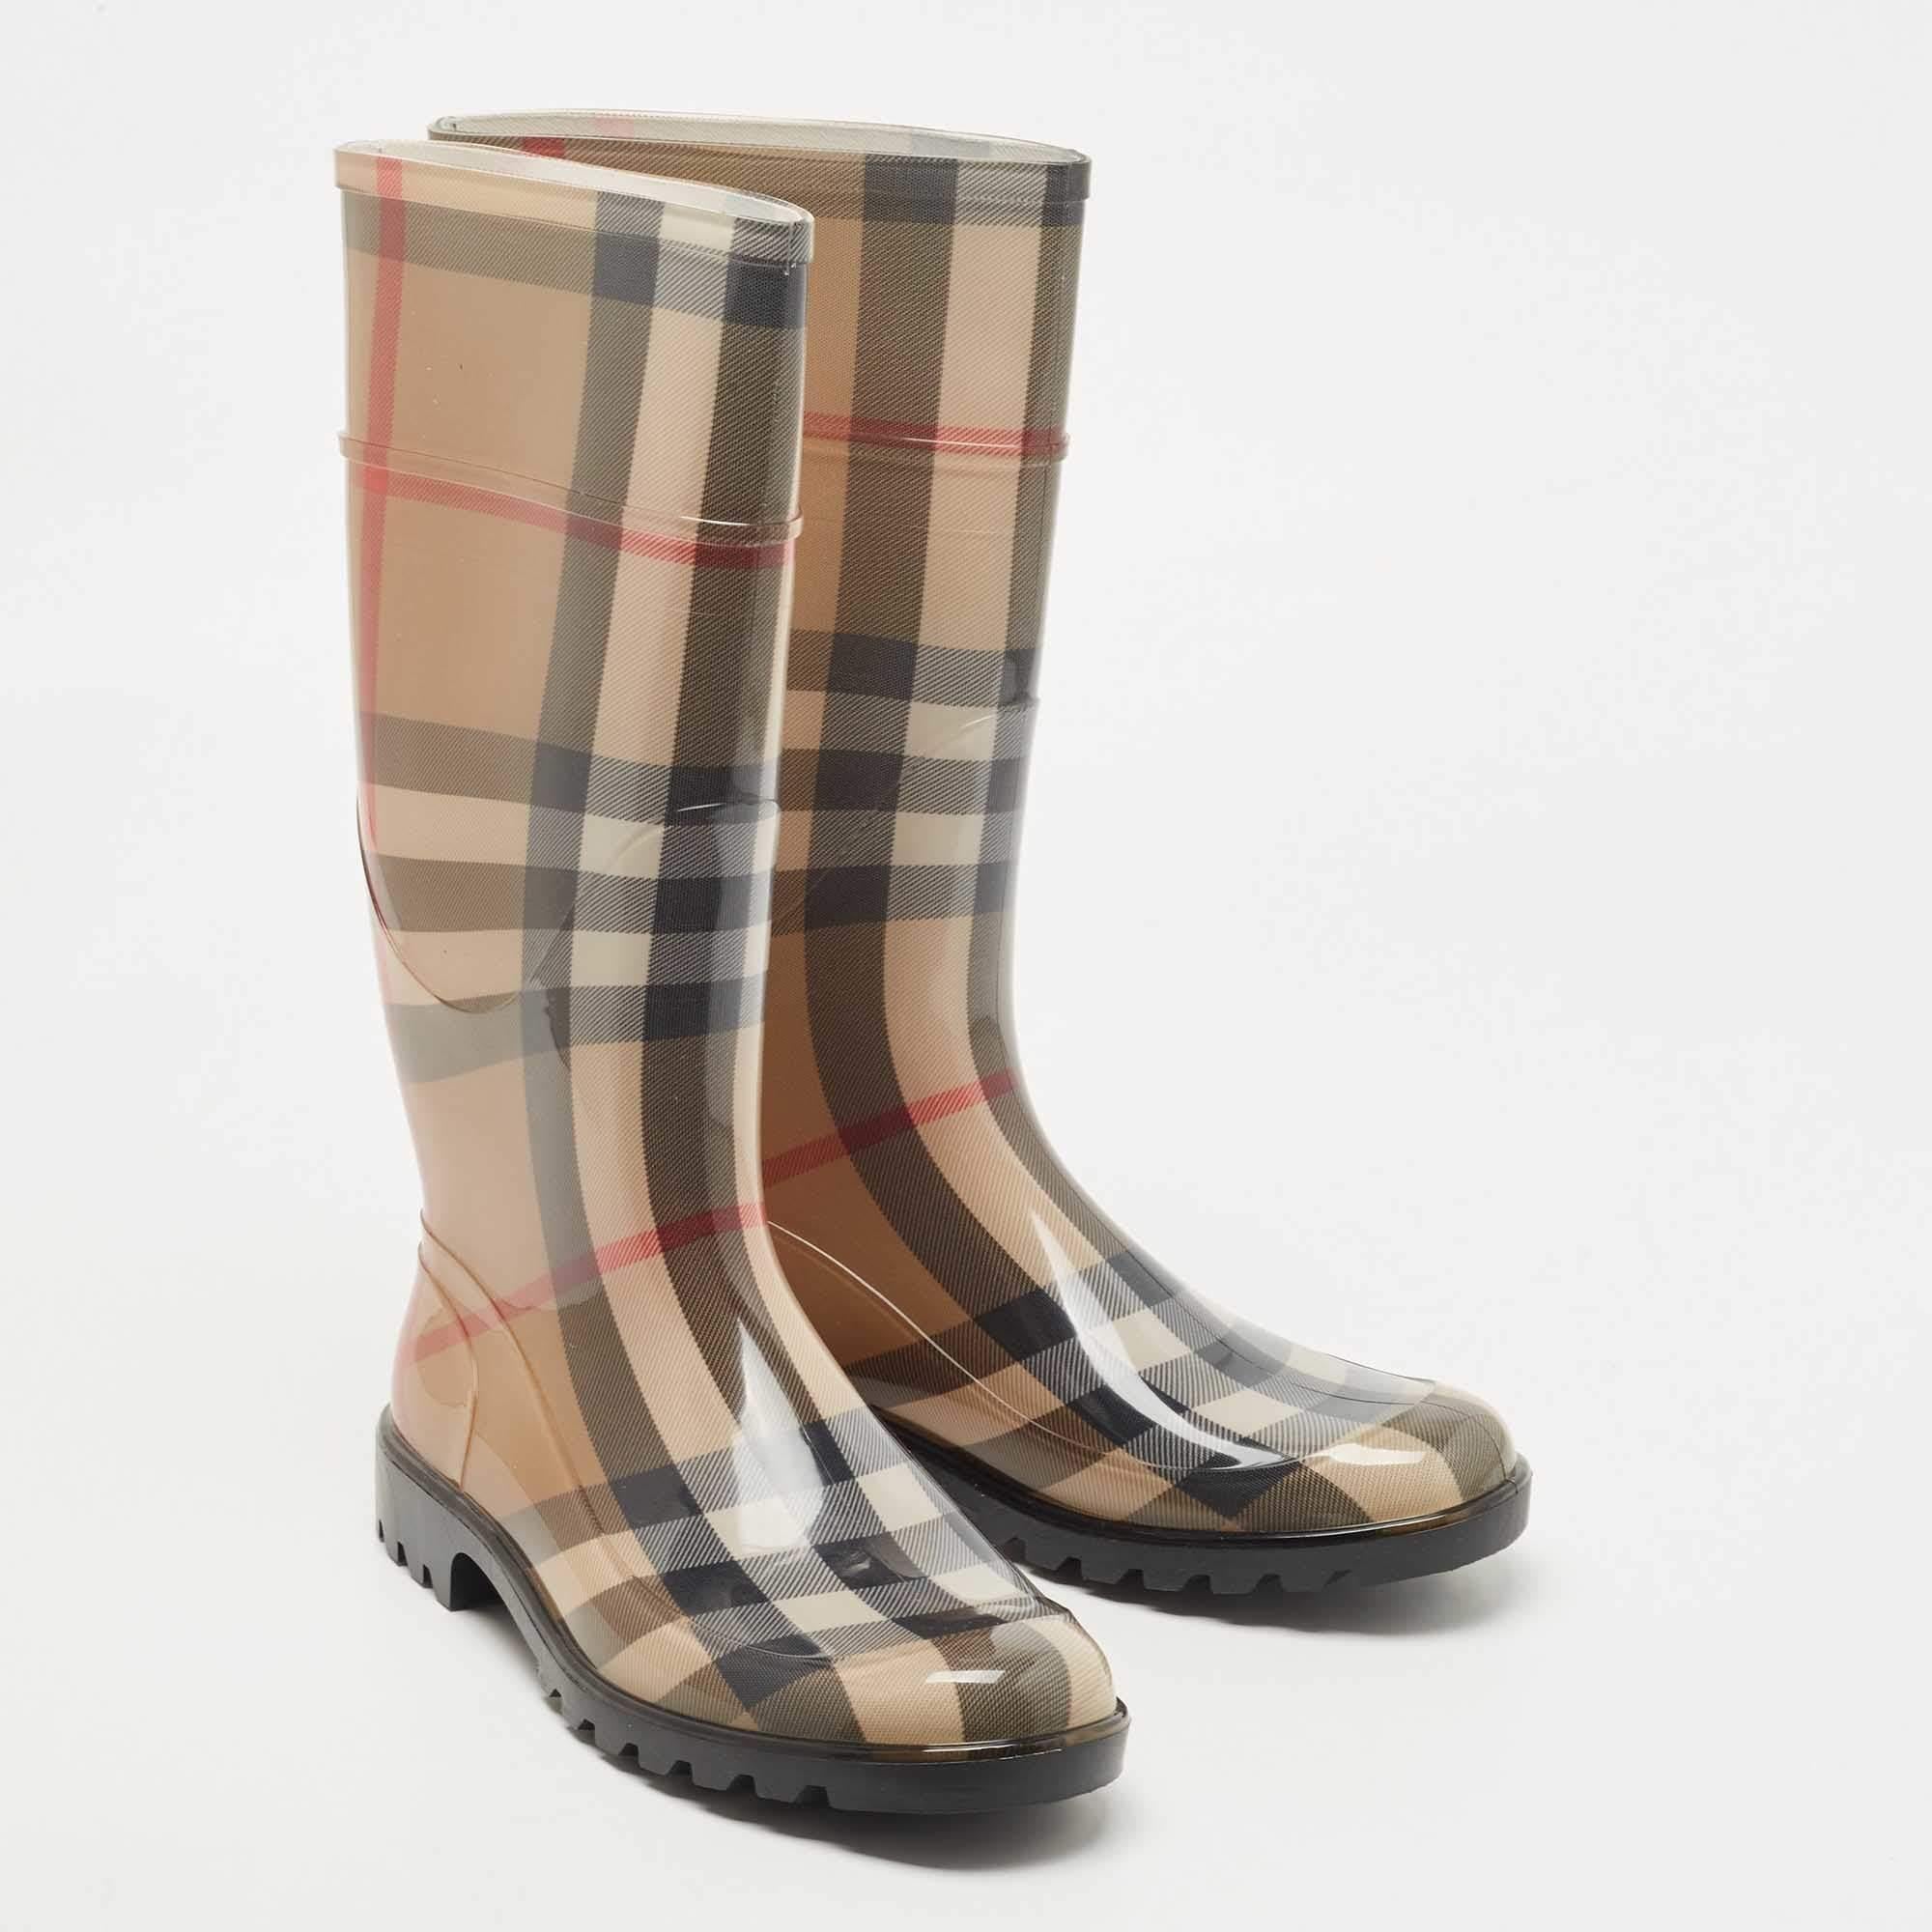 Designed by the House of Burberry, these gorgeous rain boots are a great pick for the season. They are created using Nova Check rubber and added with a fabric lining. Obtain a luxe look wearing these Burberry rain boots.

Includes: Original Box